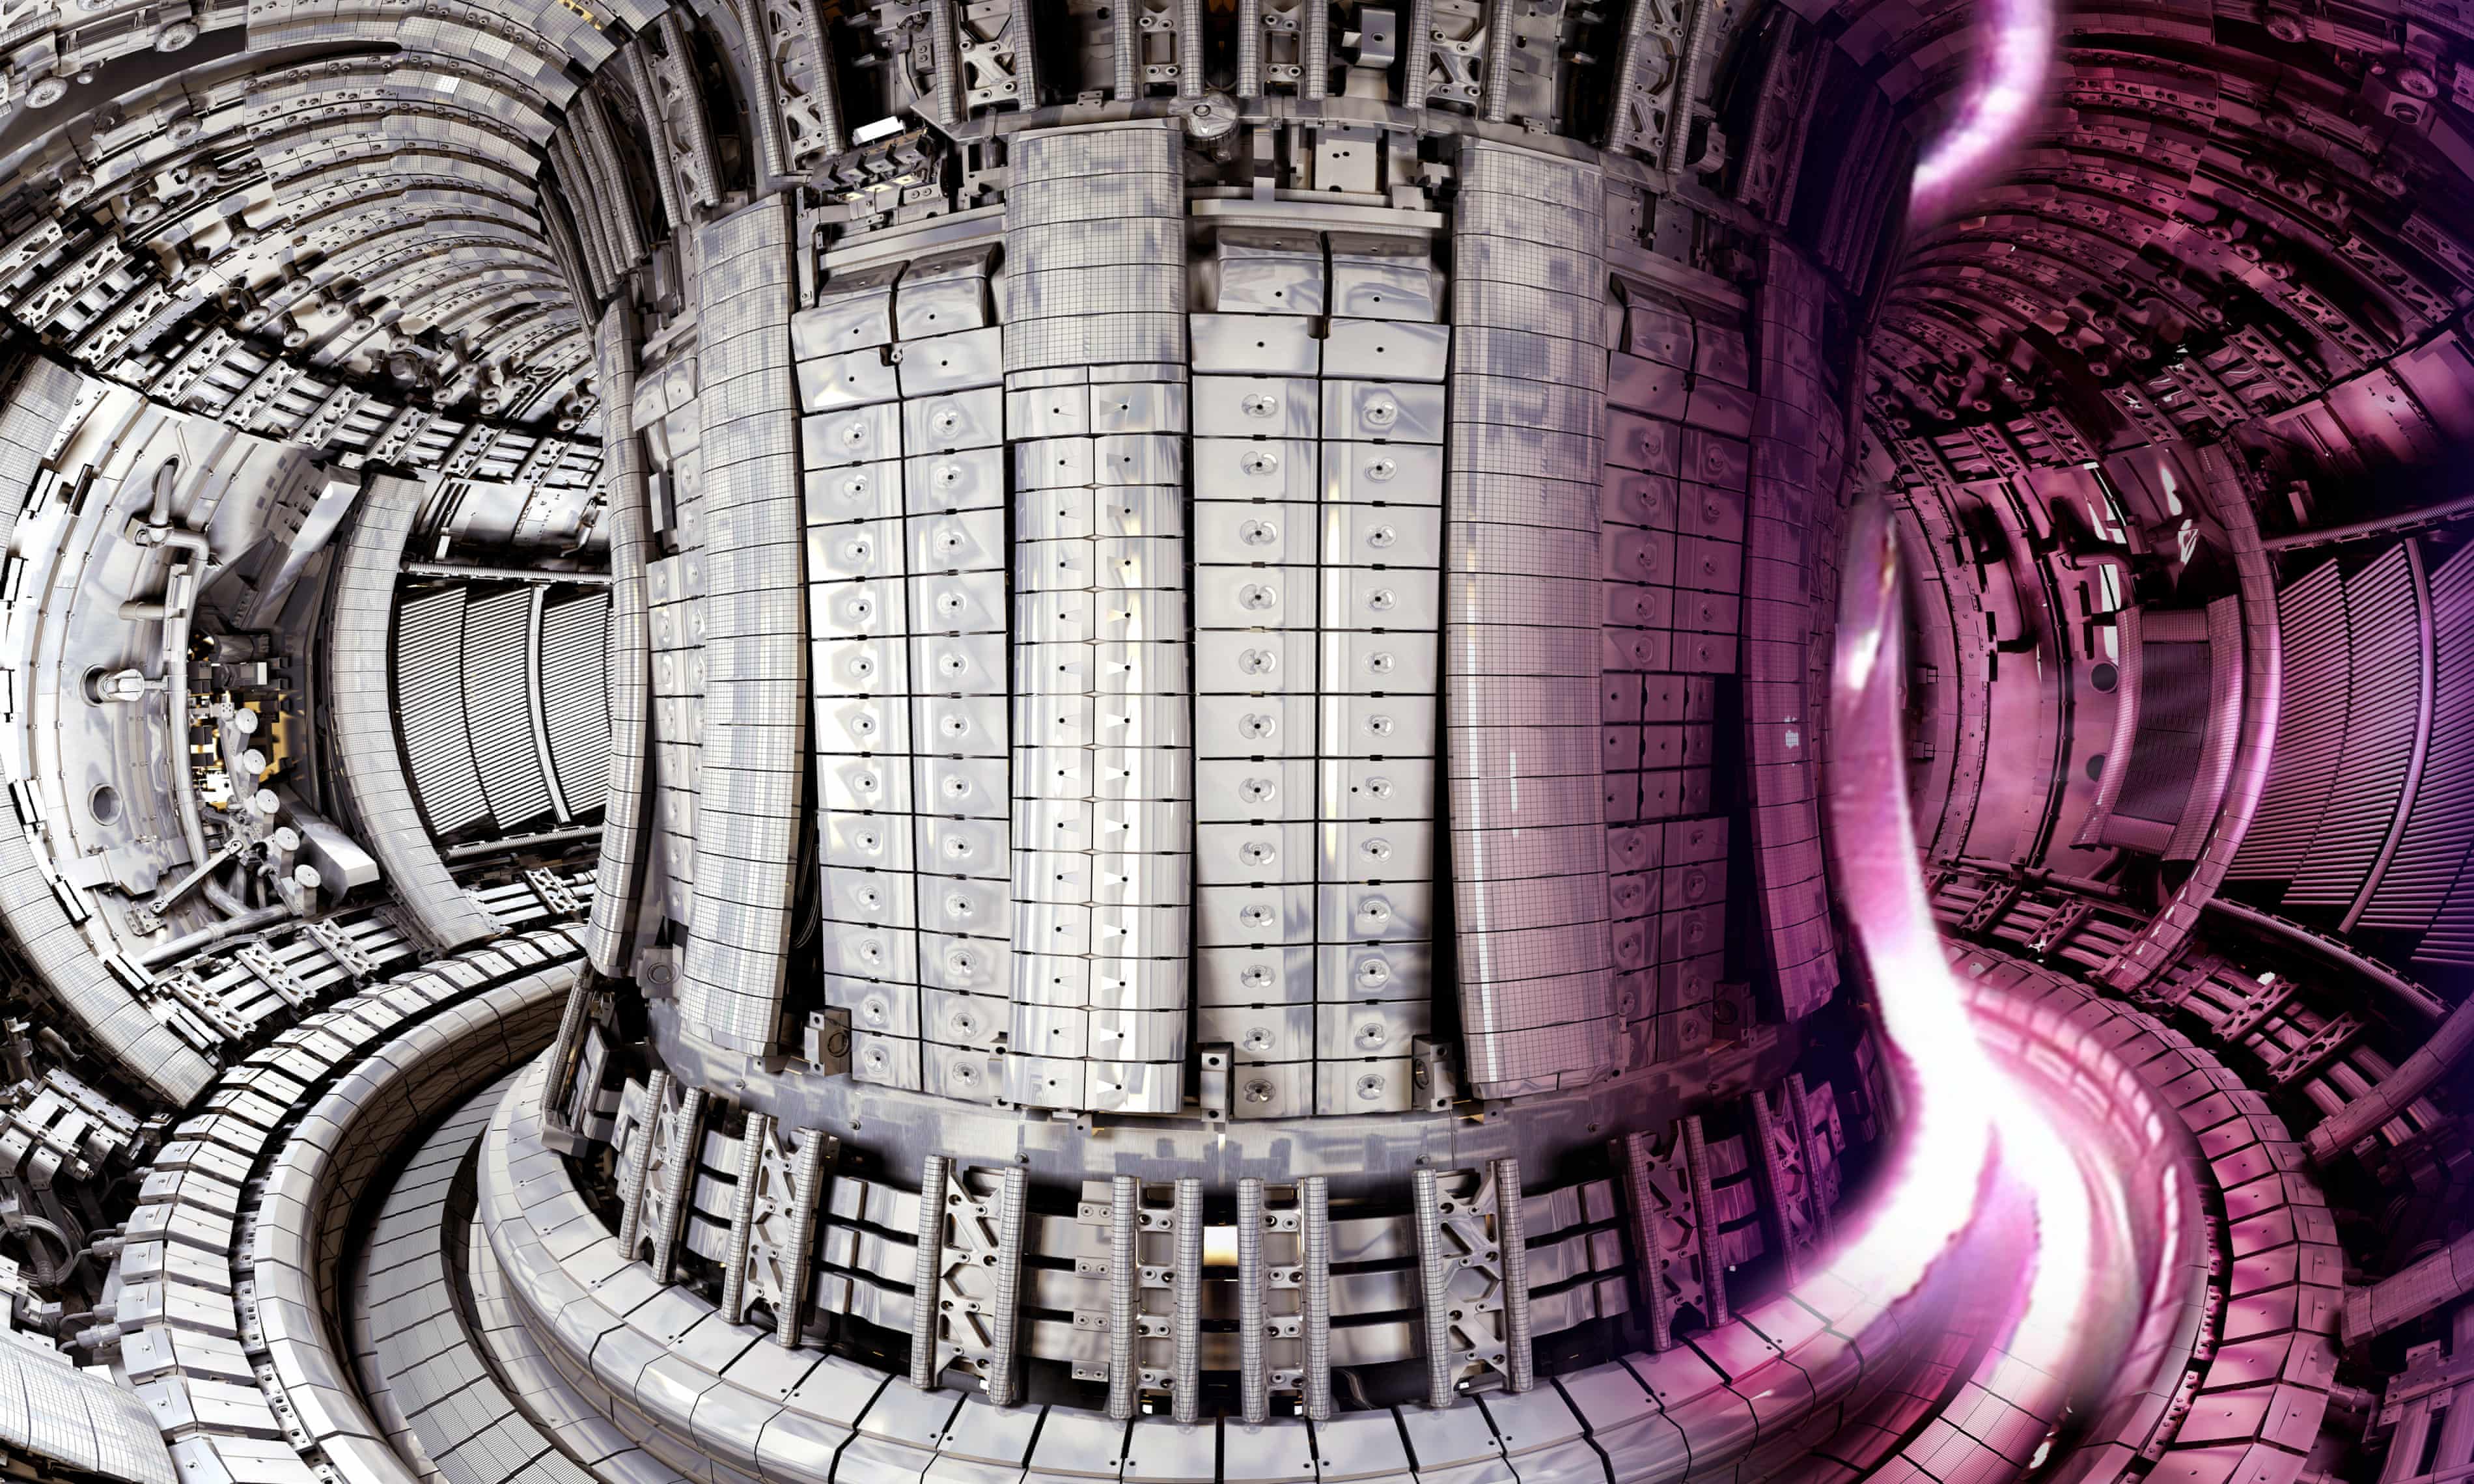 Energy based on power of stars is step closer after nuclear fusion heat record (theguardian.com)